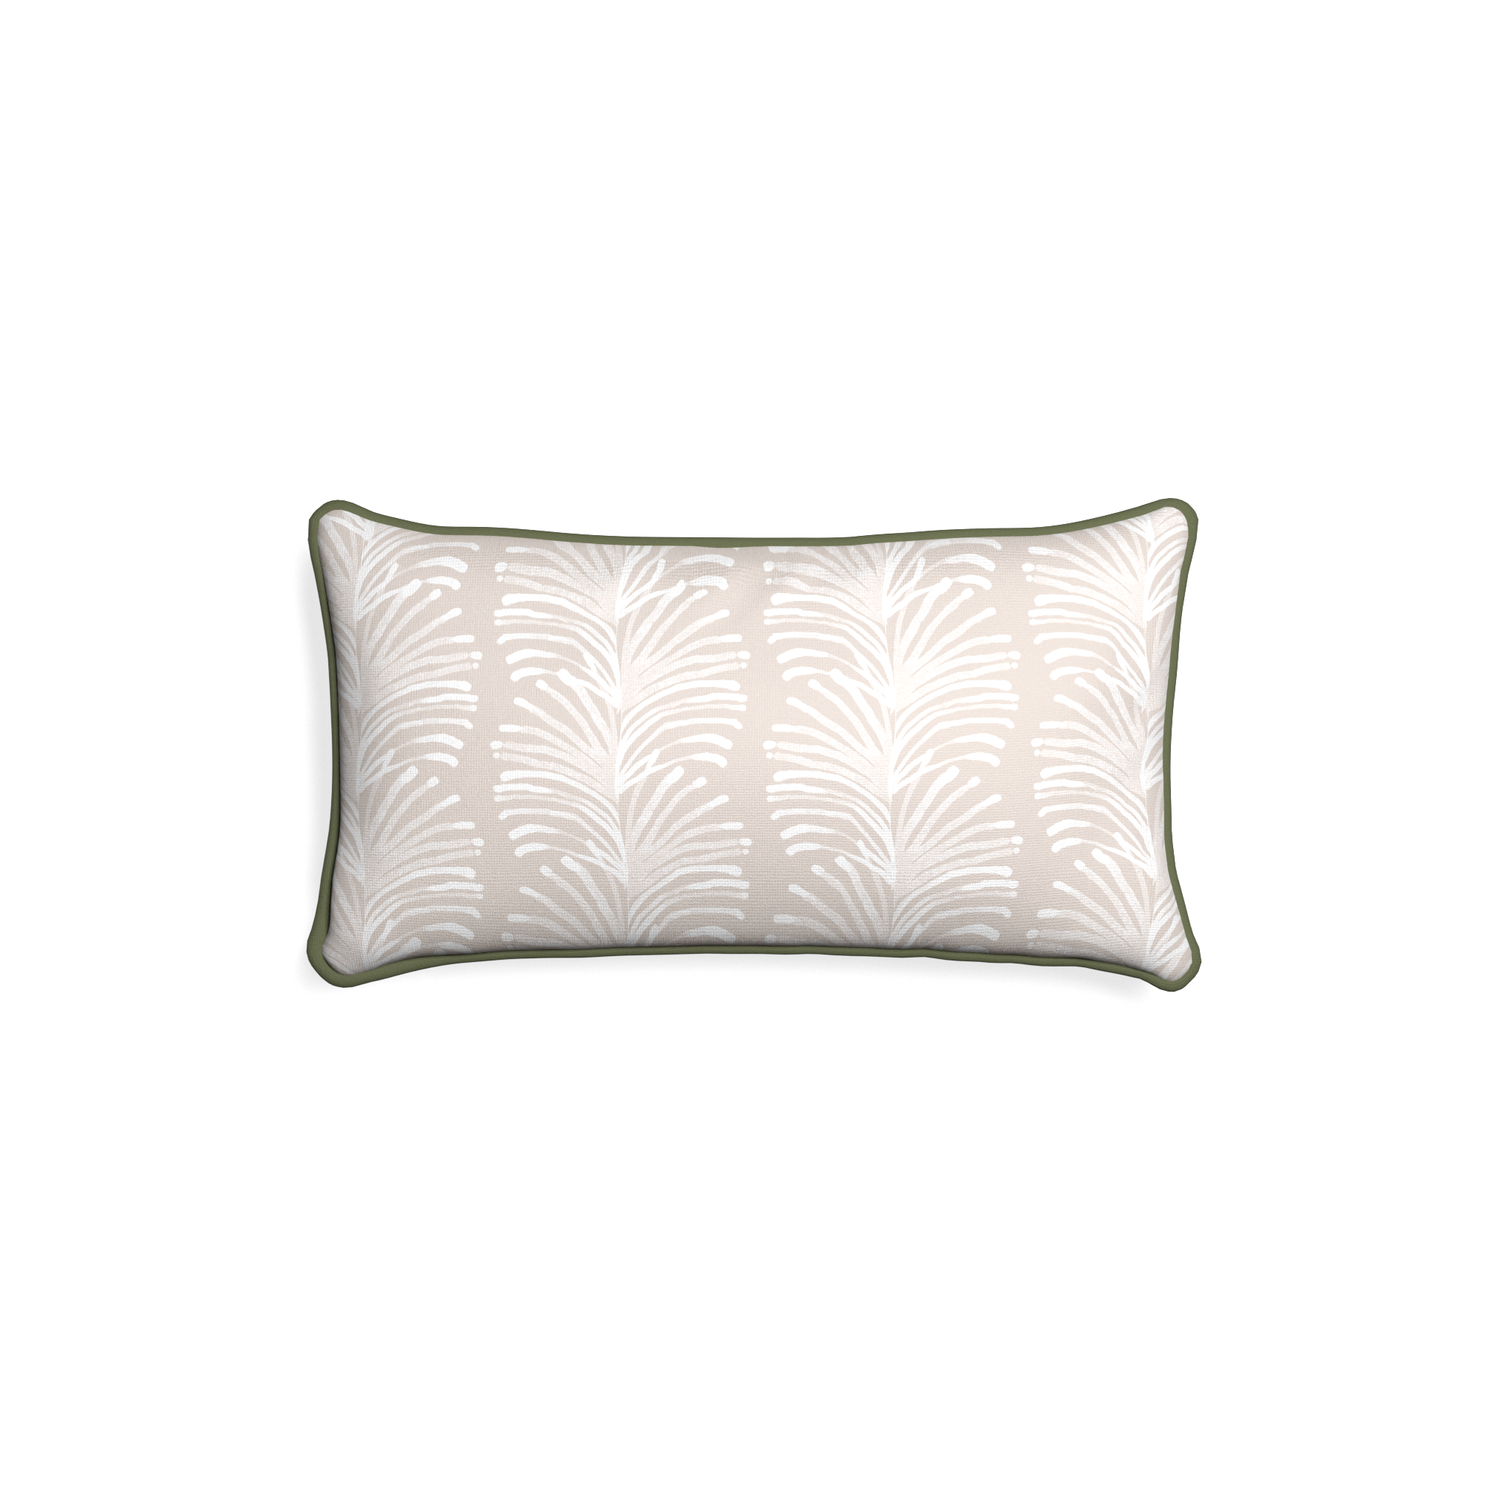 Petite-lumbar emma sand custom sand colored botanical stripepillow with f piping on white background